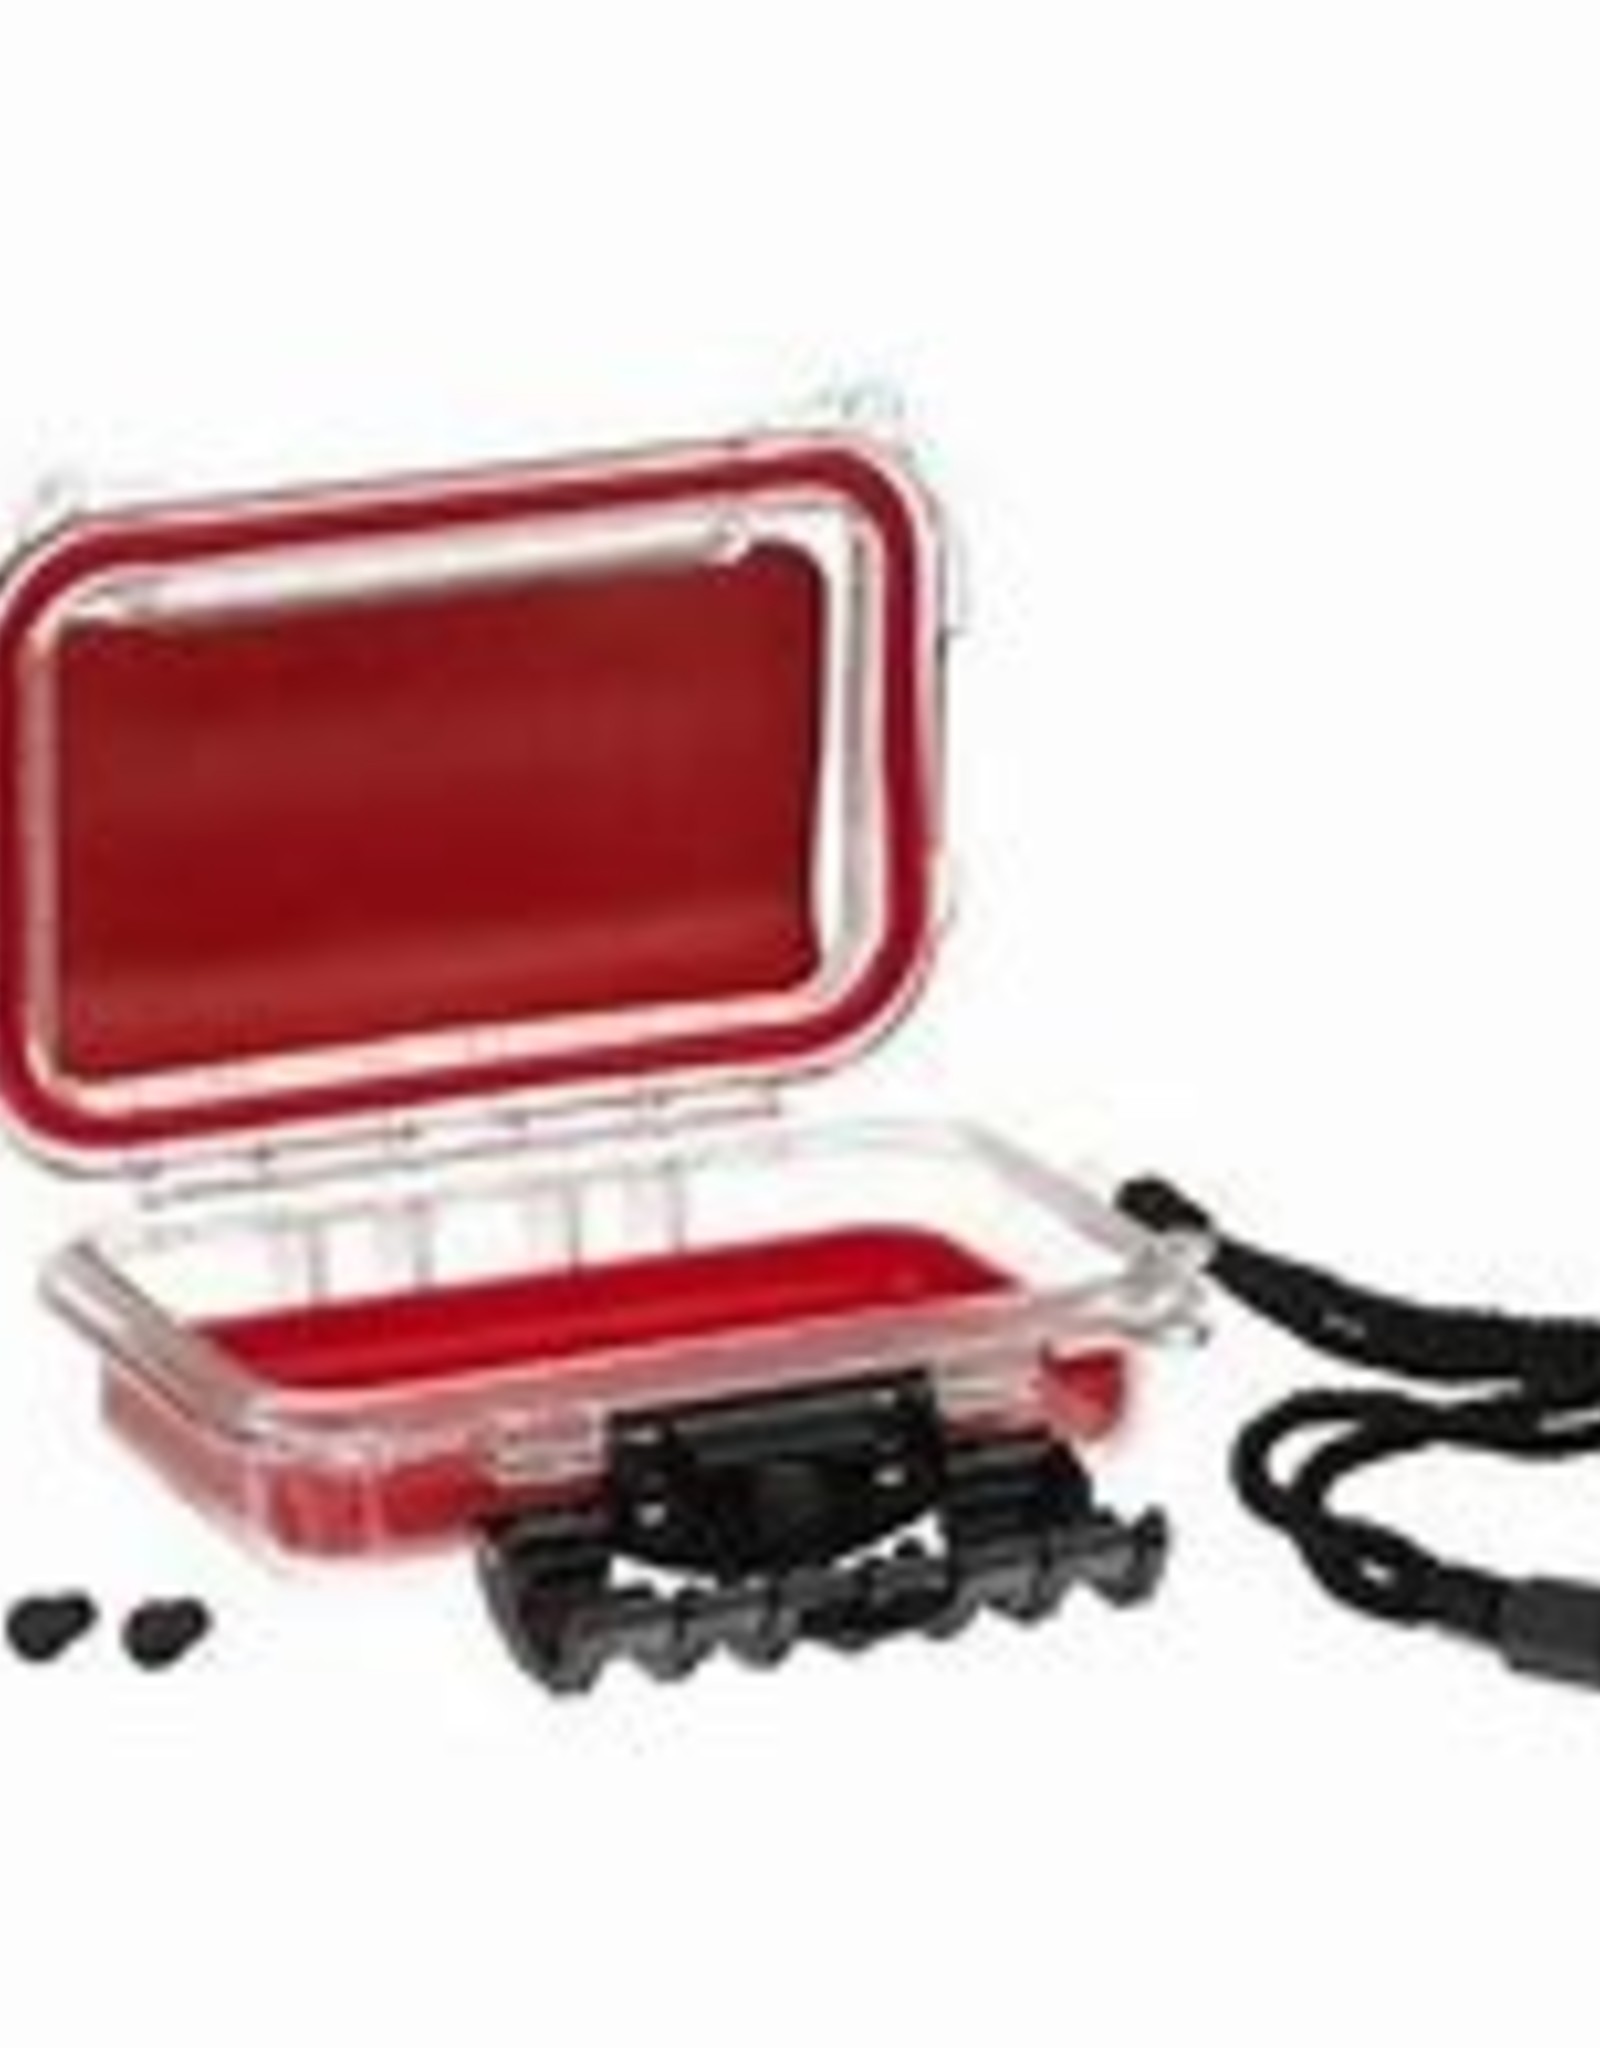 Waterproof Case 3449 Size Red Plano 1449-00 Guide Series - Preeceville  Archery Products